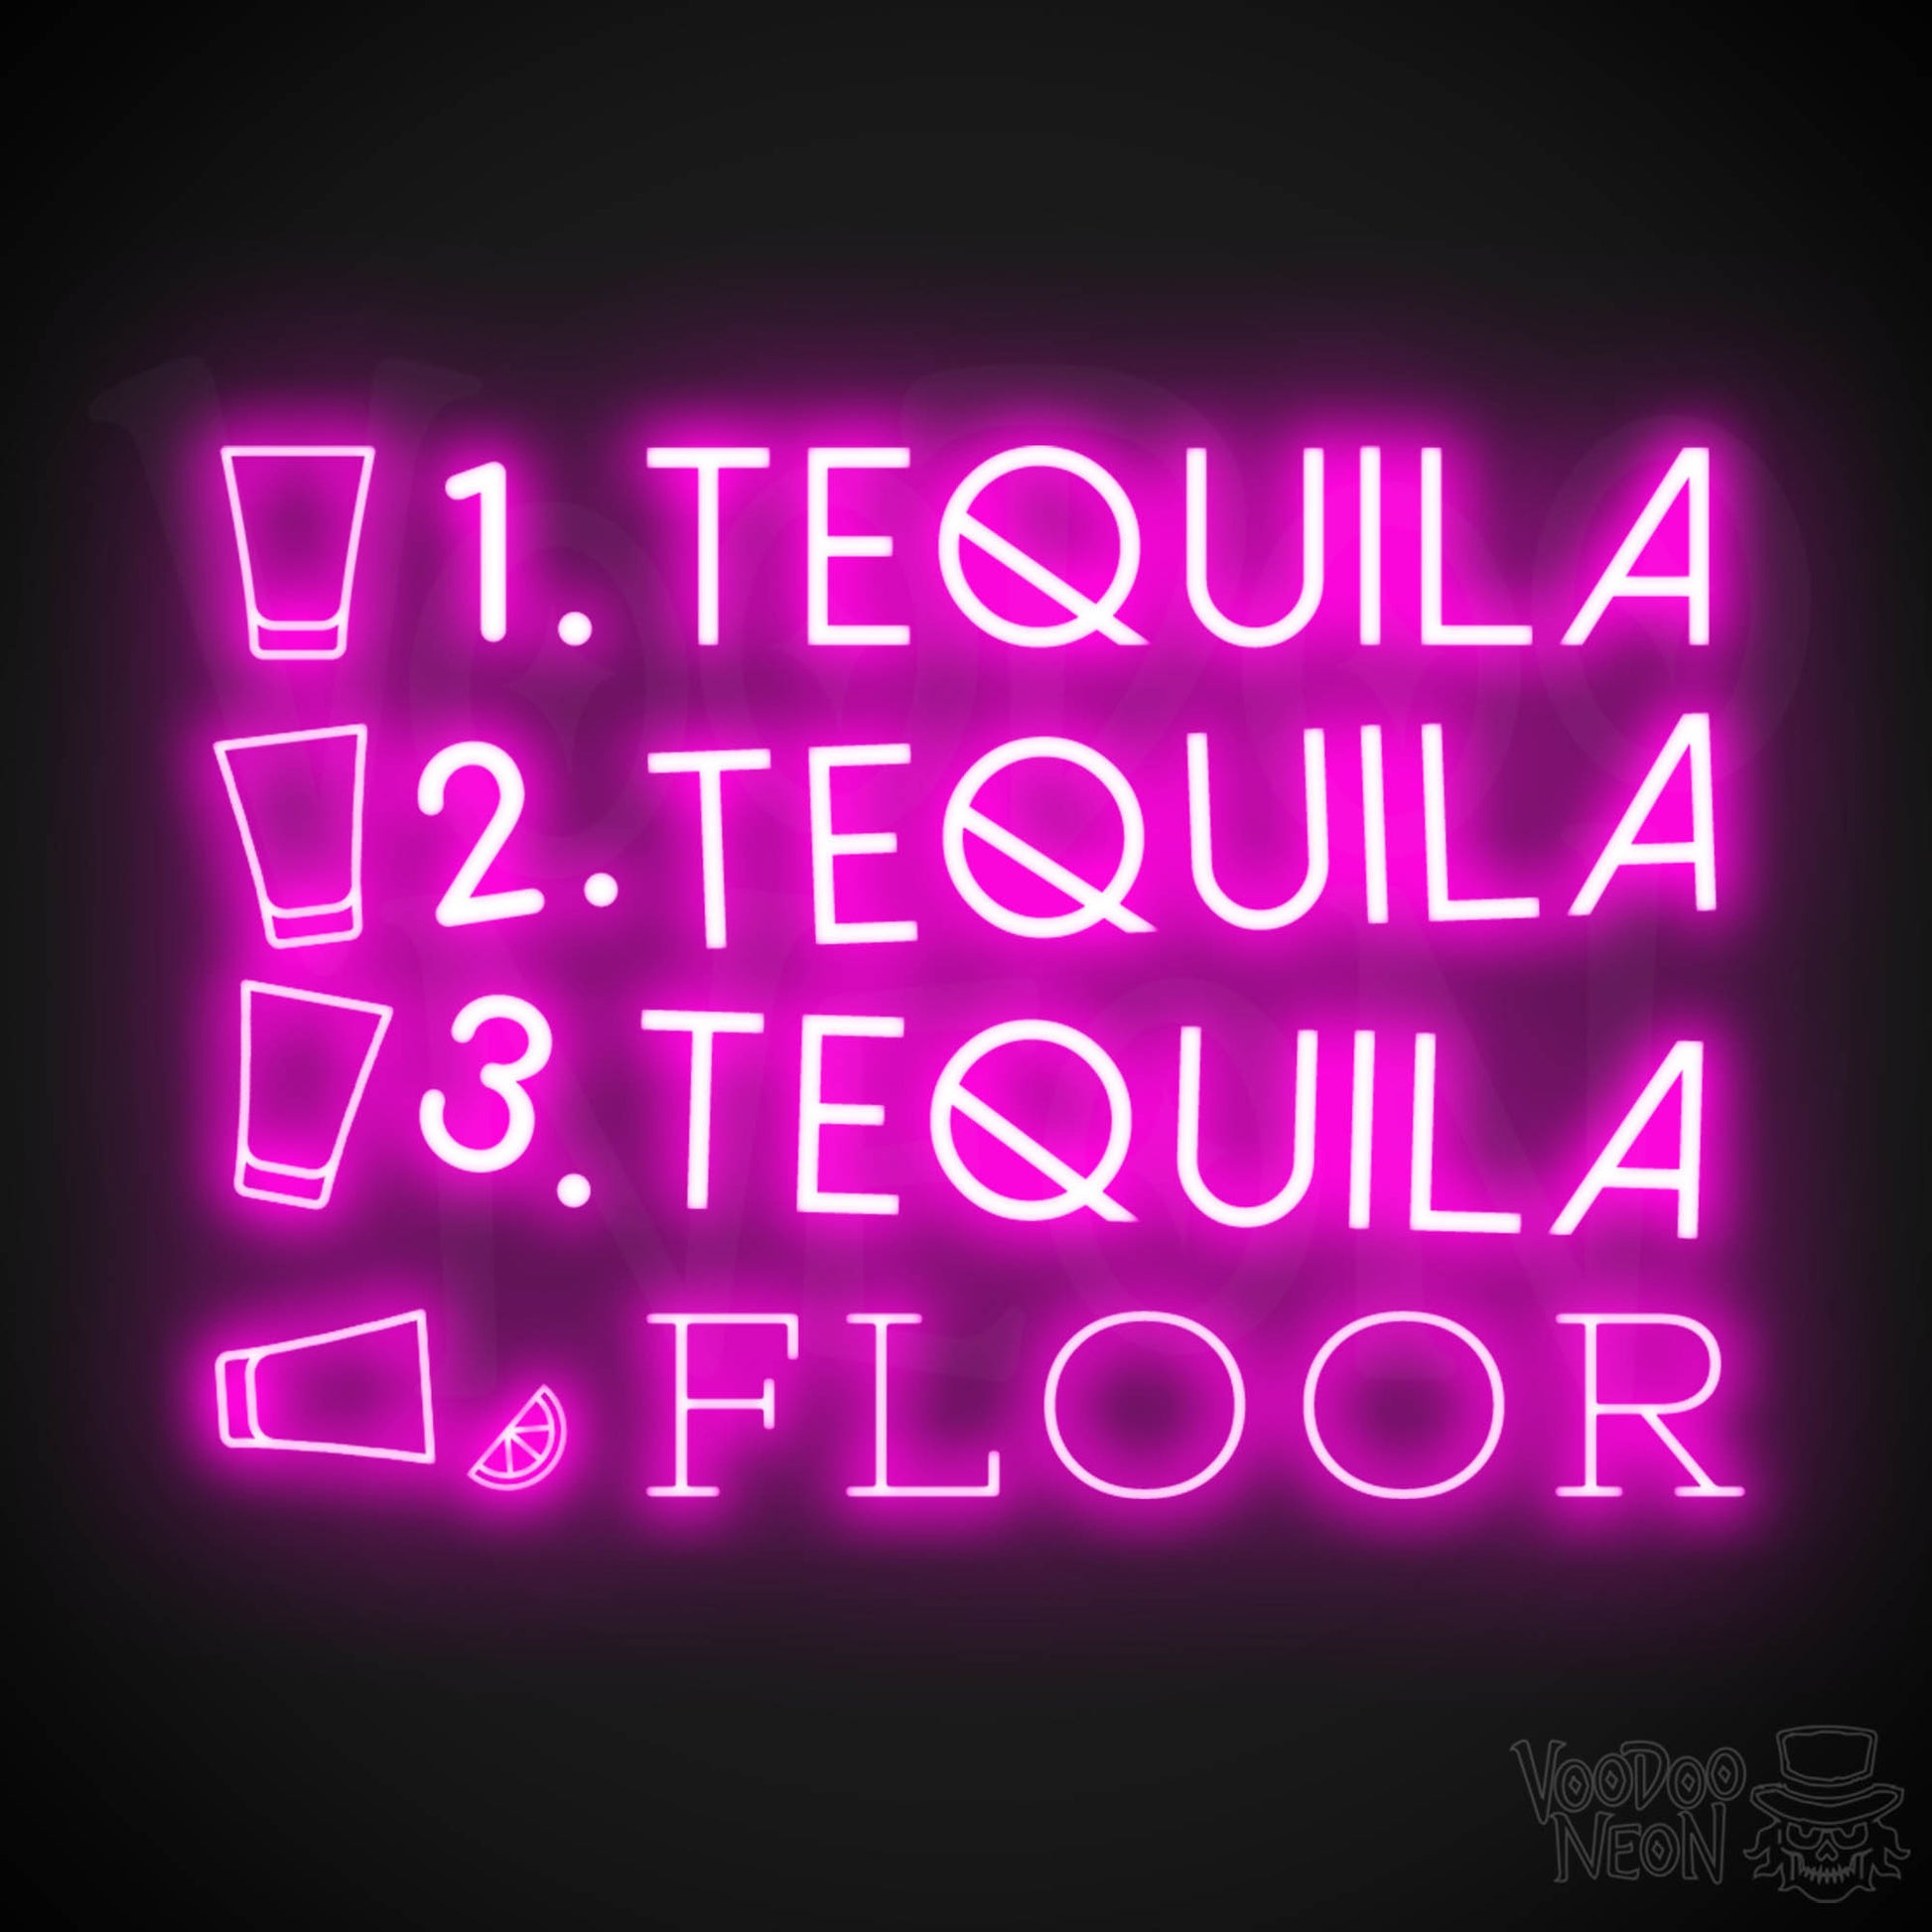 One Tequila Two Tequila Three Tequila Floor Neon sign - Neon Wall Art - Color Pink